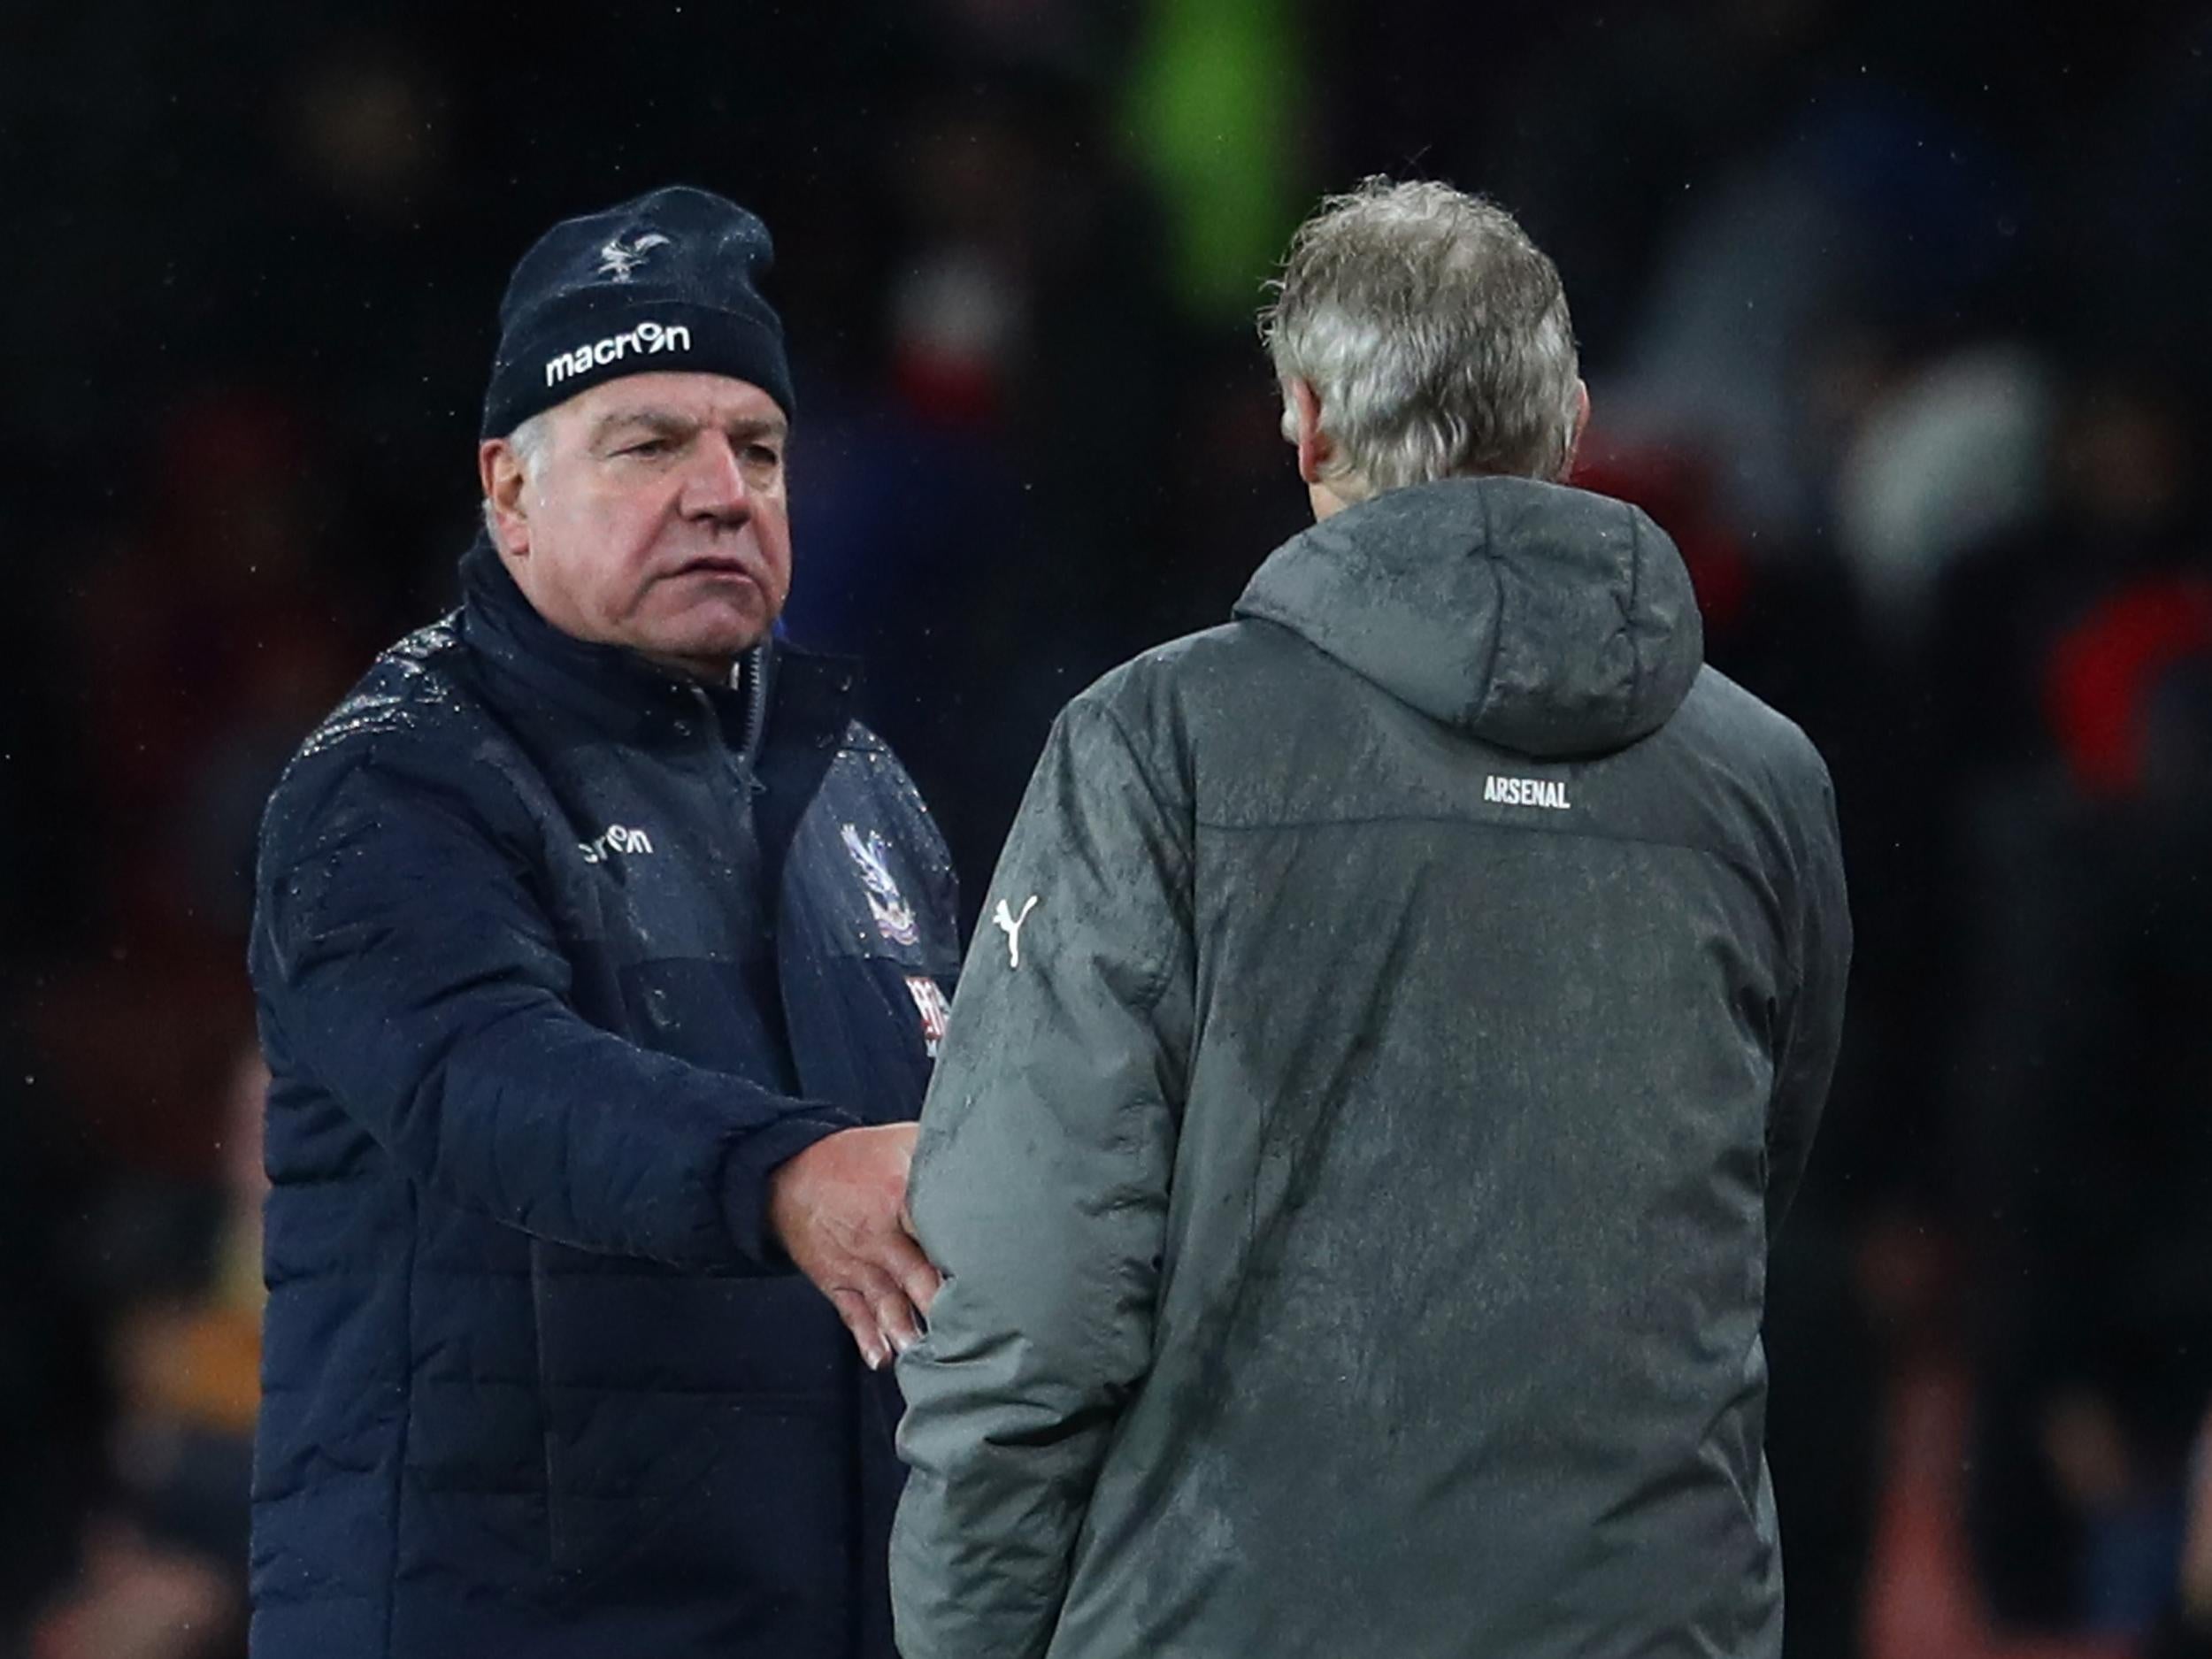 Allardyce said criticism in normal as a football manager